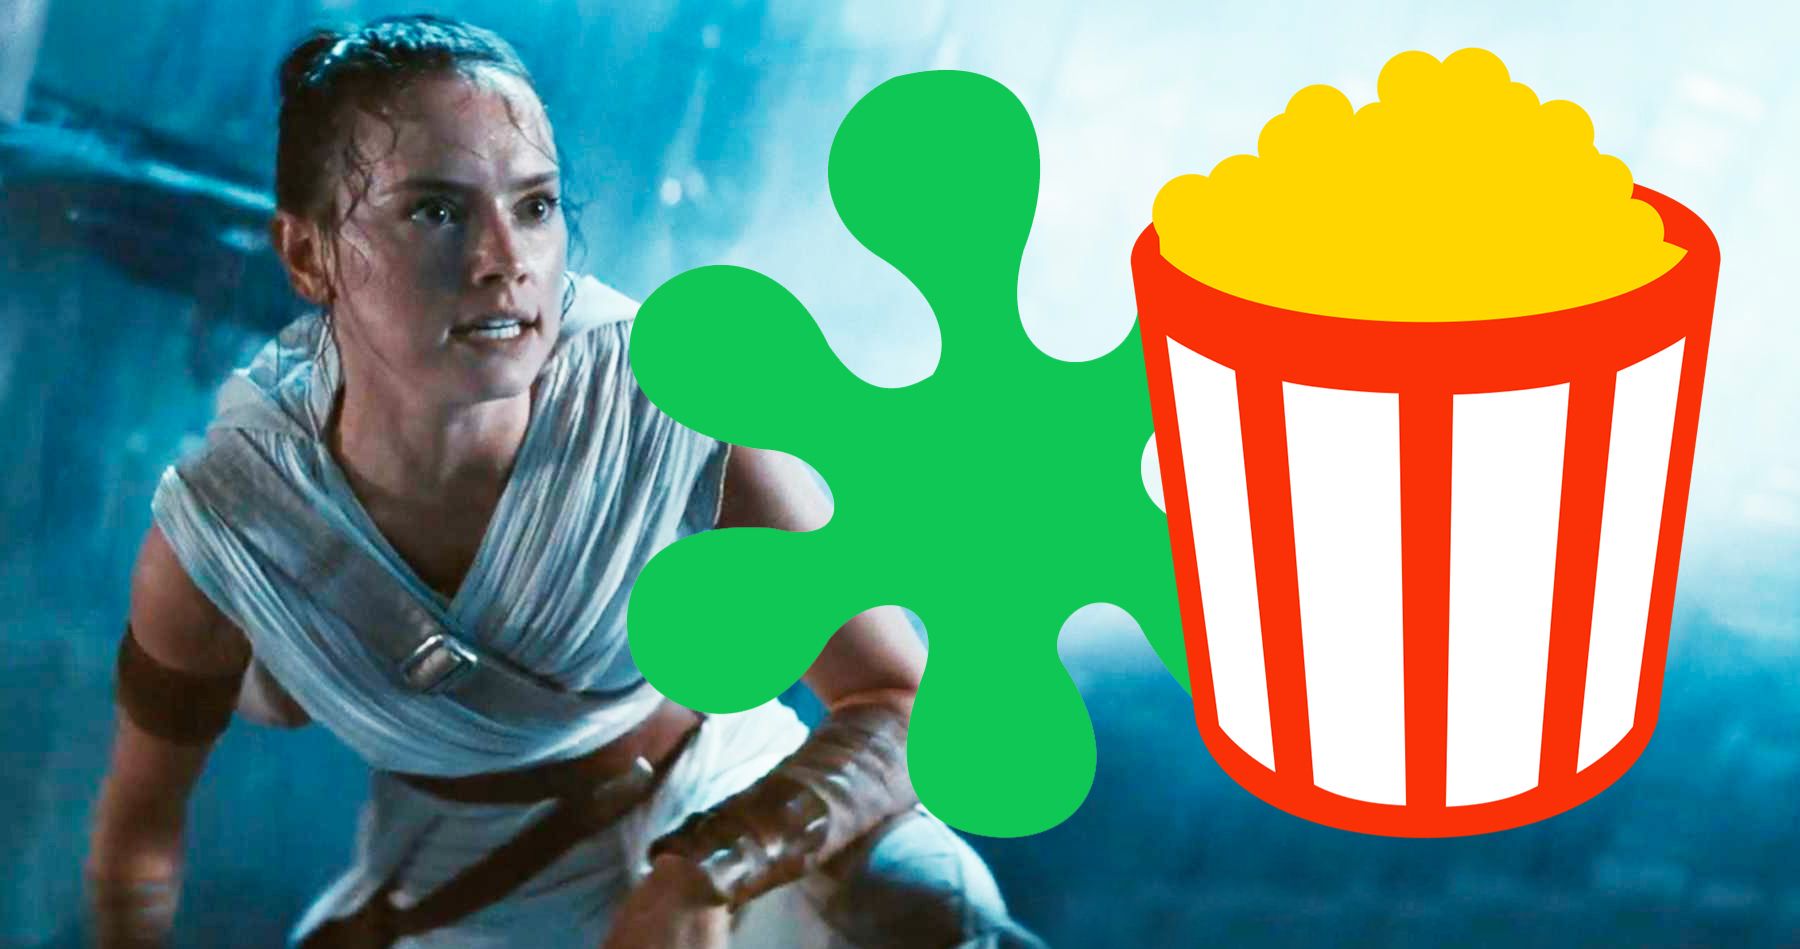 The Rise of Skywalker Divides Critics and Audiences on Rotten Tomatoes